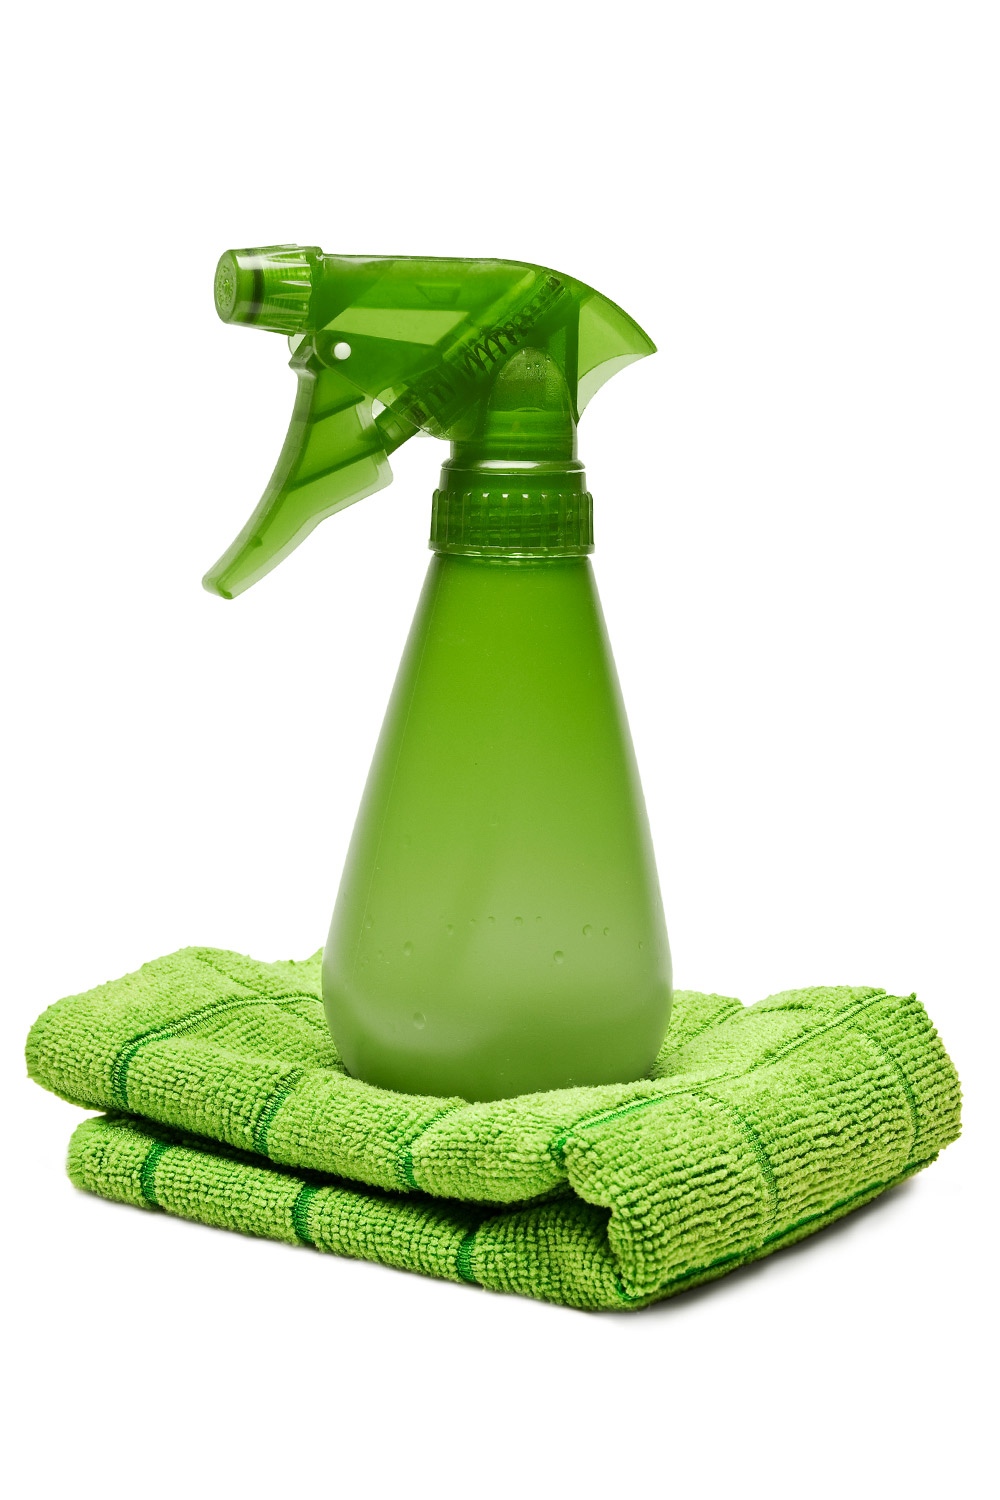 To make your own window cleaner, add 1/2 to 1 cup of vinegar to 1 gallon of water